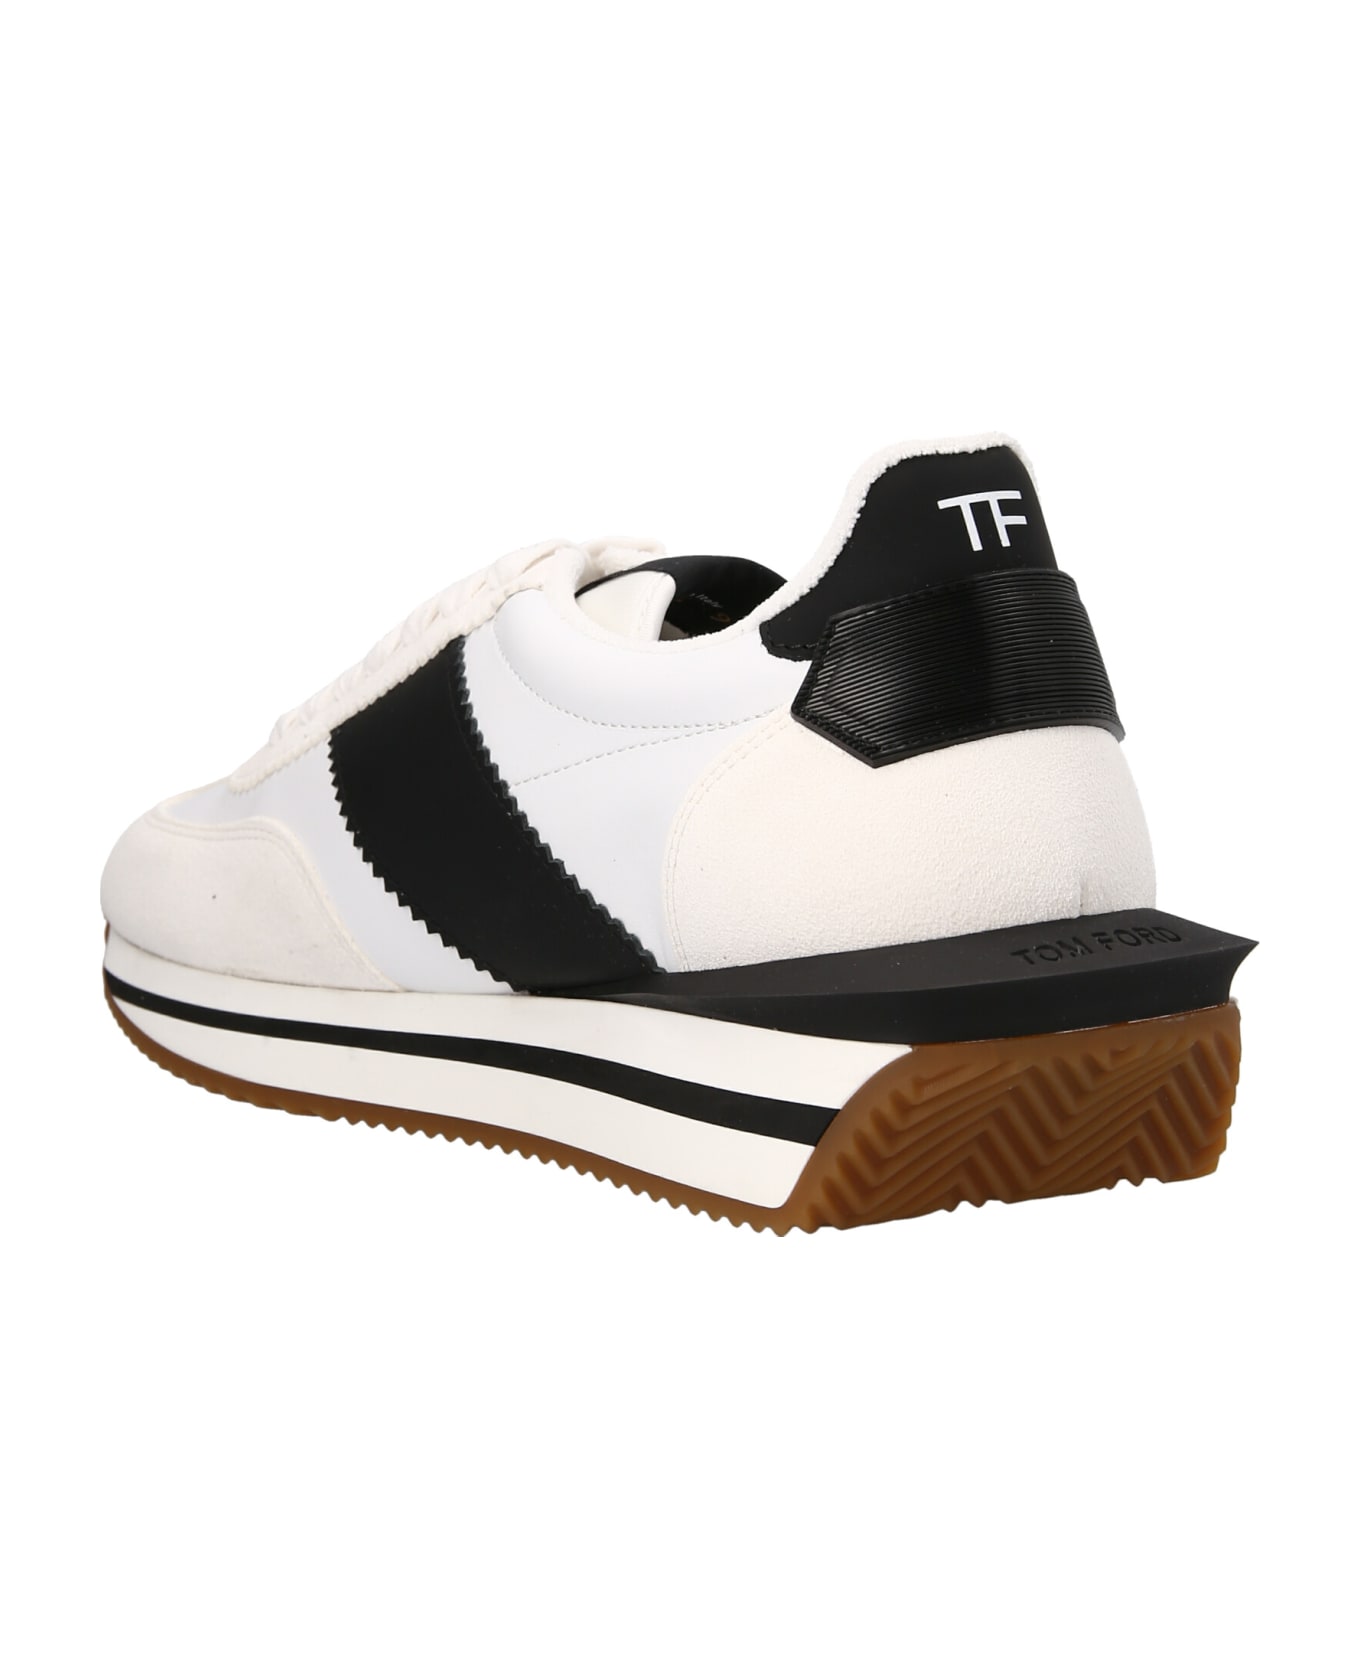 Tom Ford Logo Leather Sneakers - Multicolor